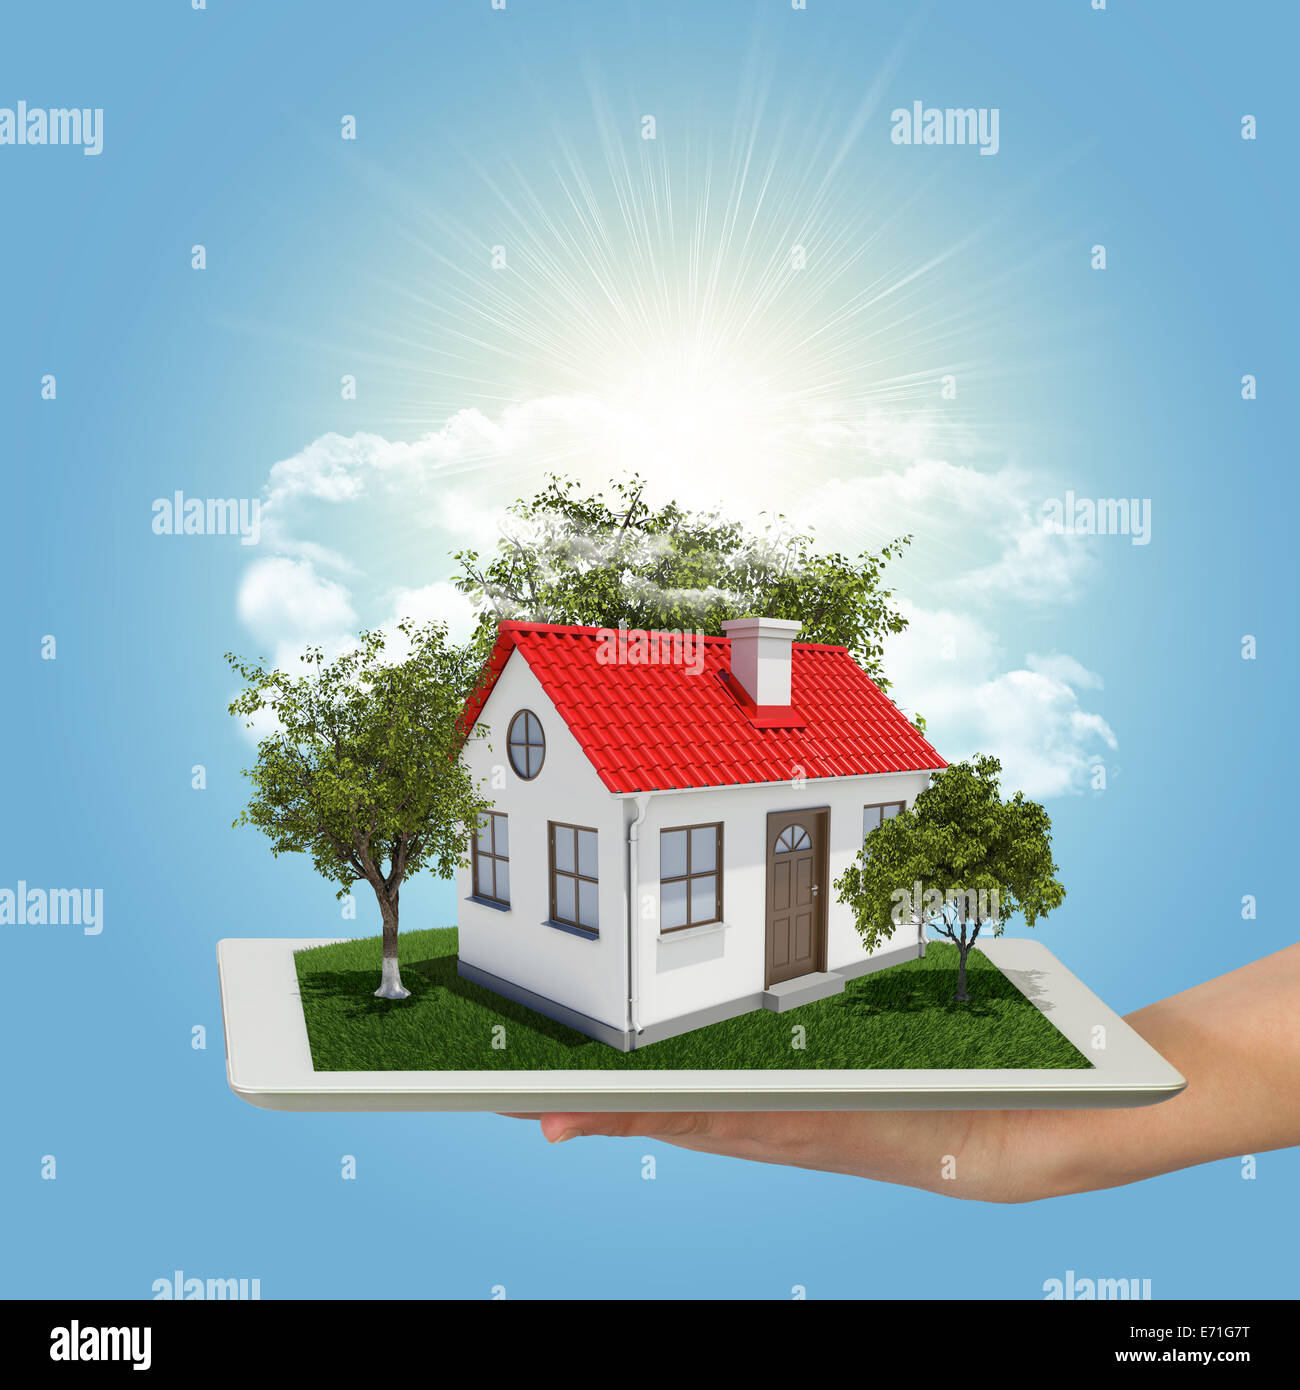 Human hand holding tablet pc with small house and trees Stock Photo